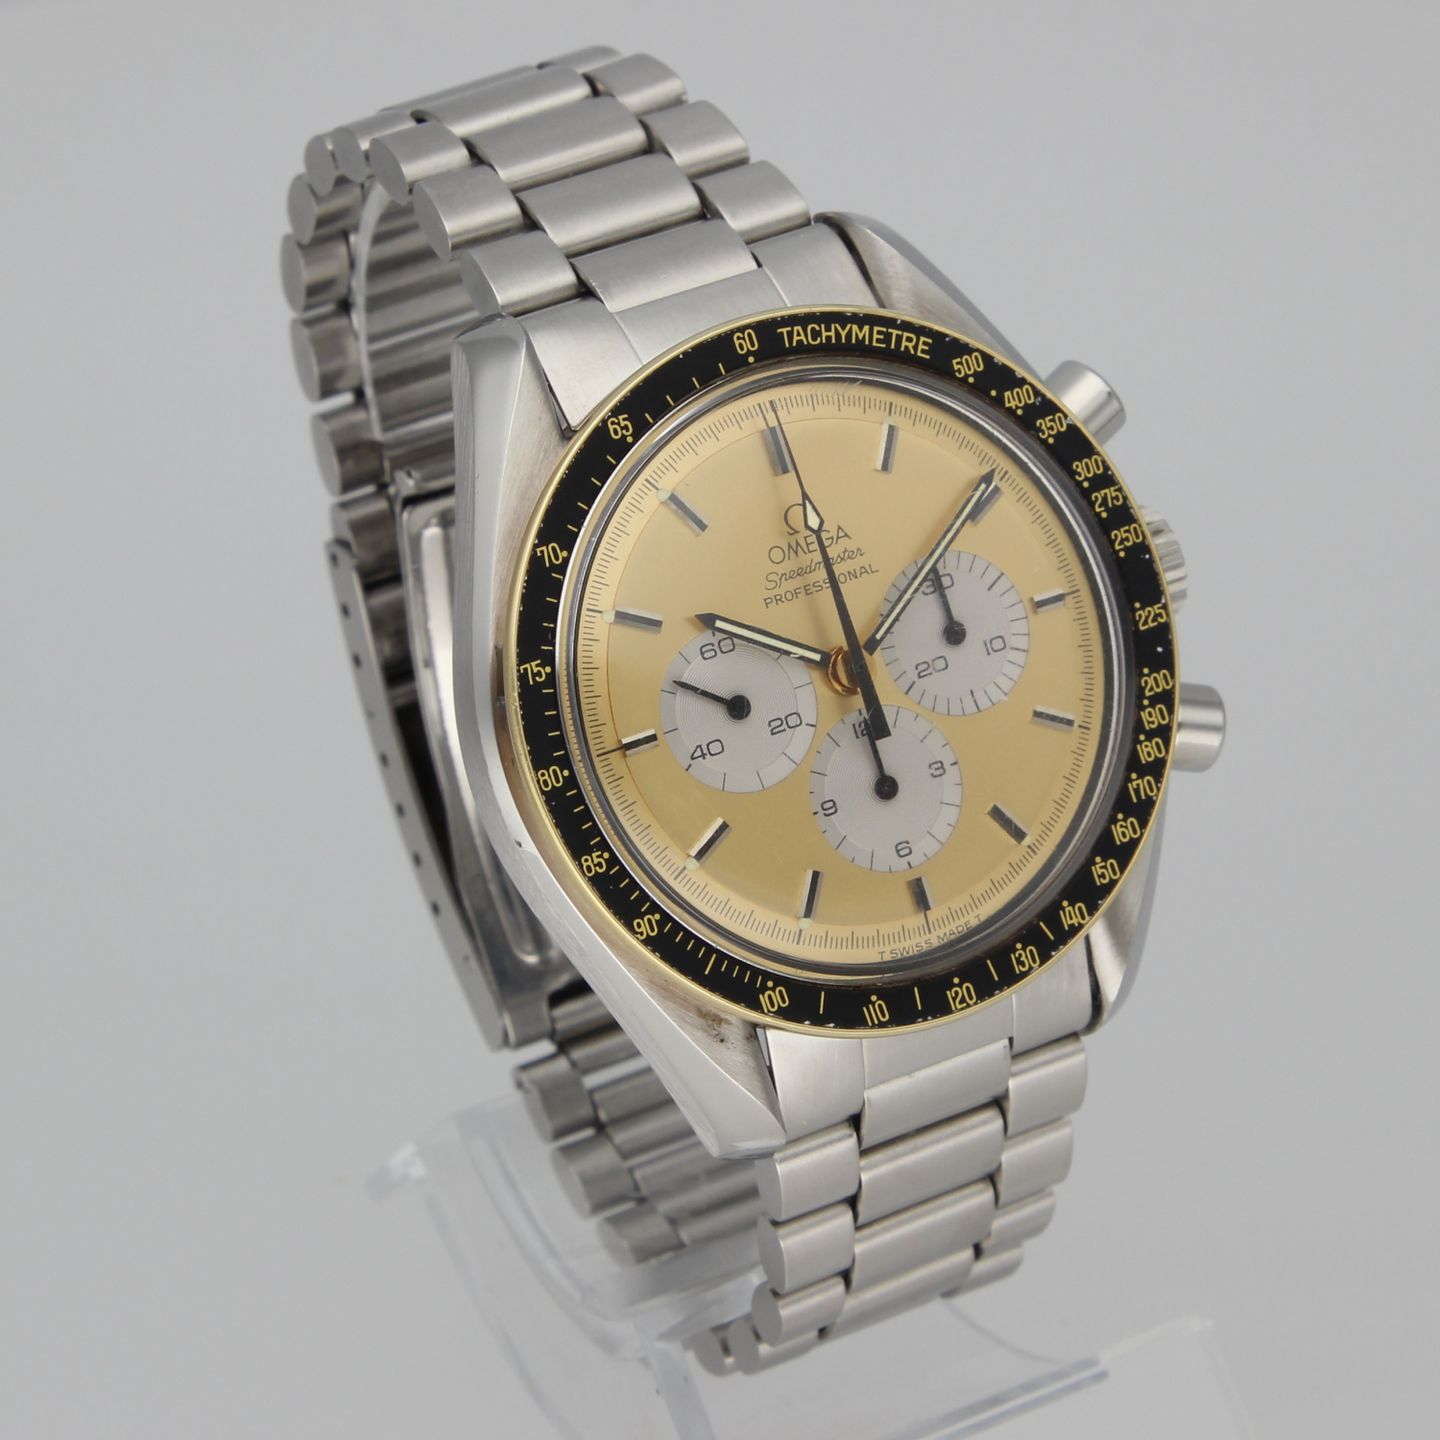 Omega Speedmaster Professional Moonwatch DD 145.0022 CHAMP (1985) - Champagne dial 42 mm Steel case (4/8)